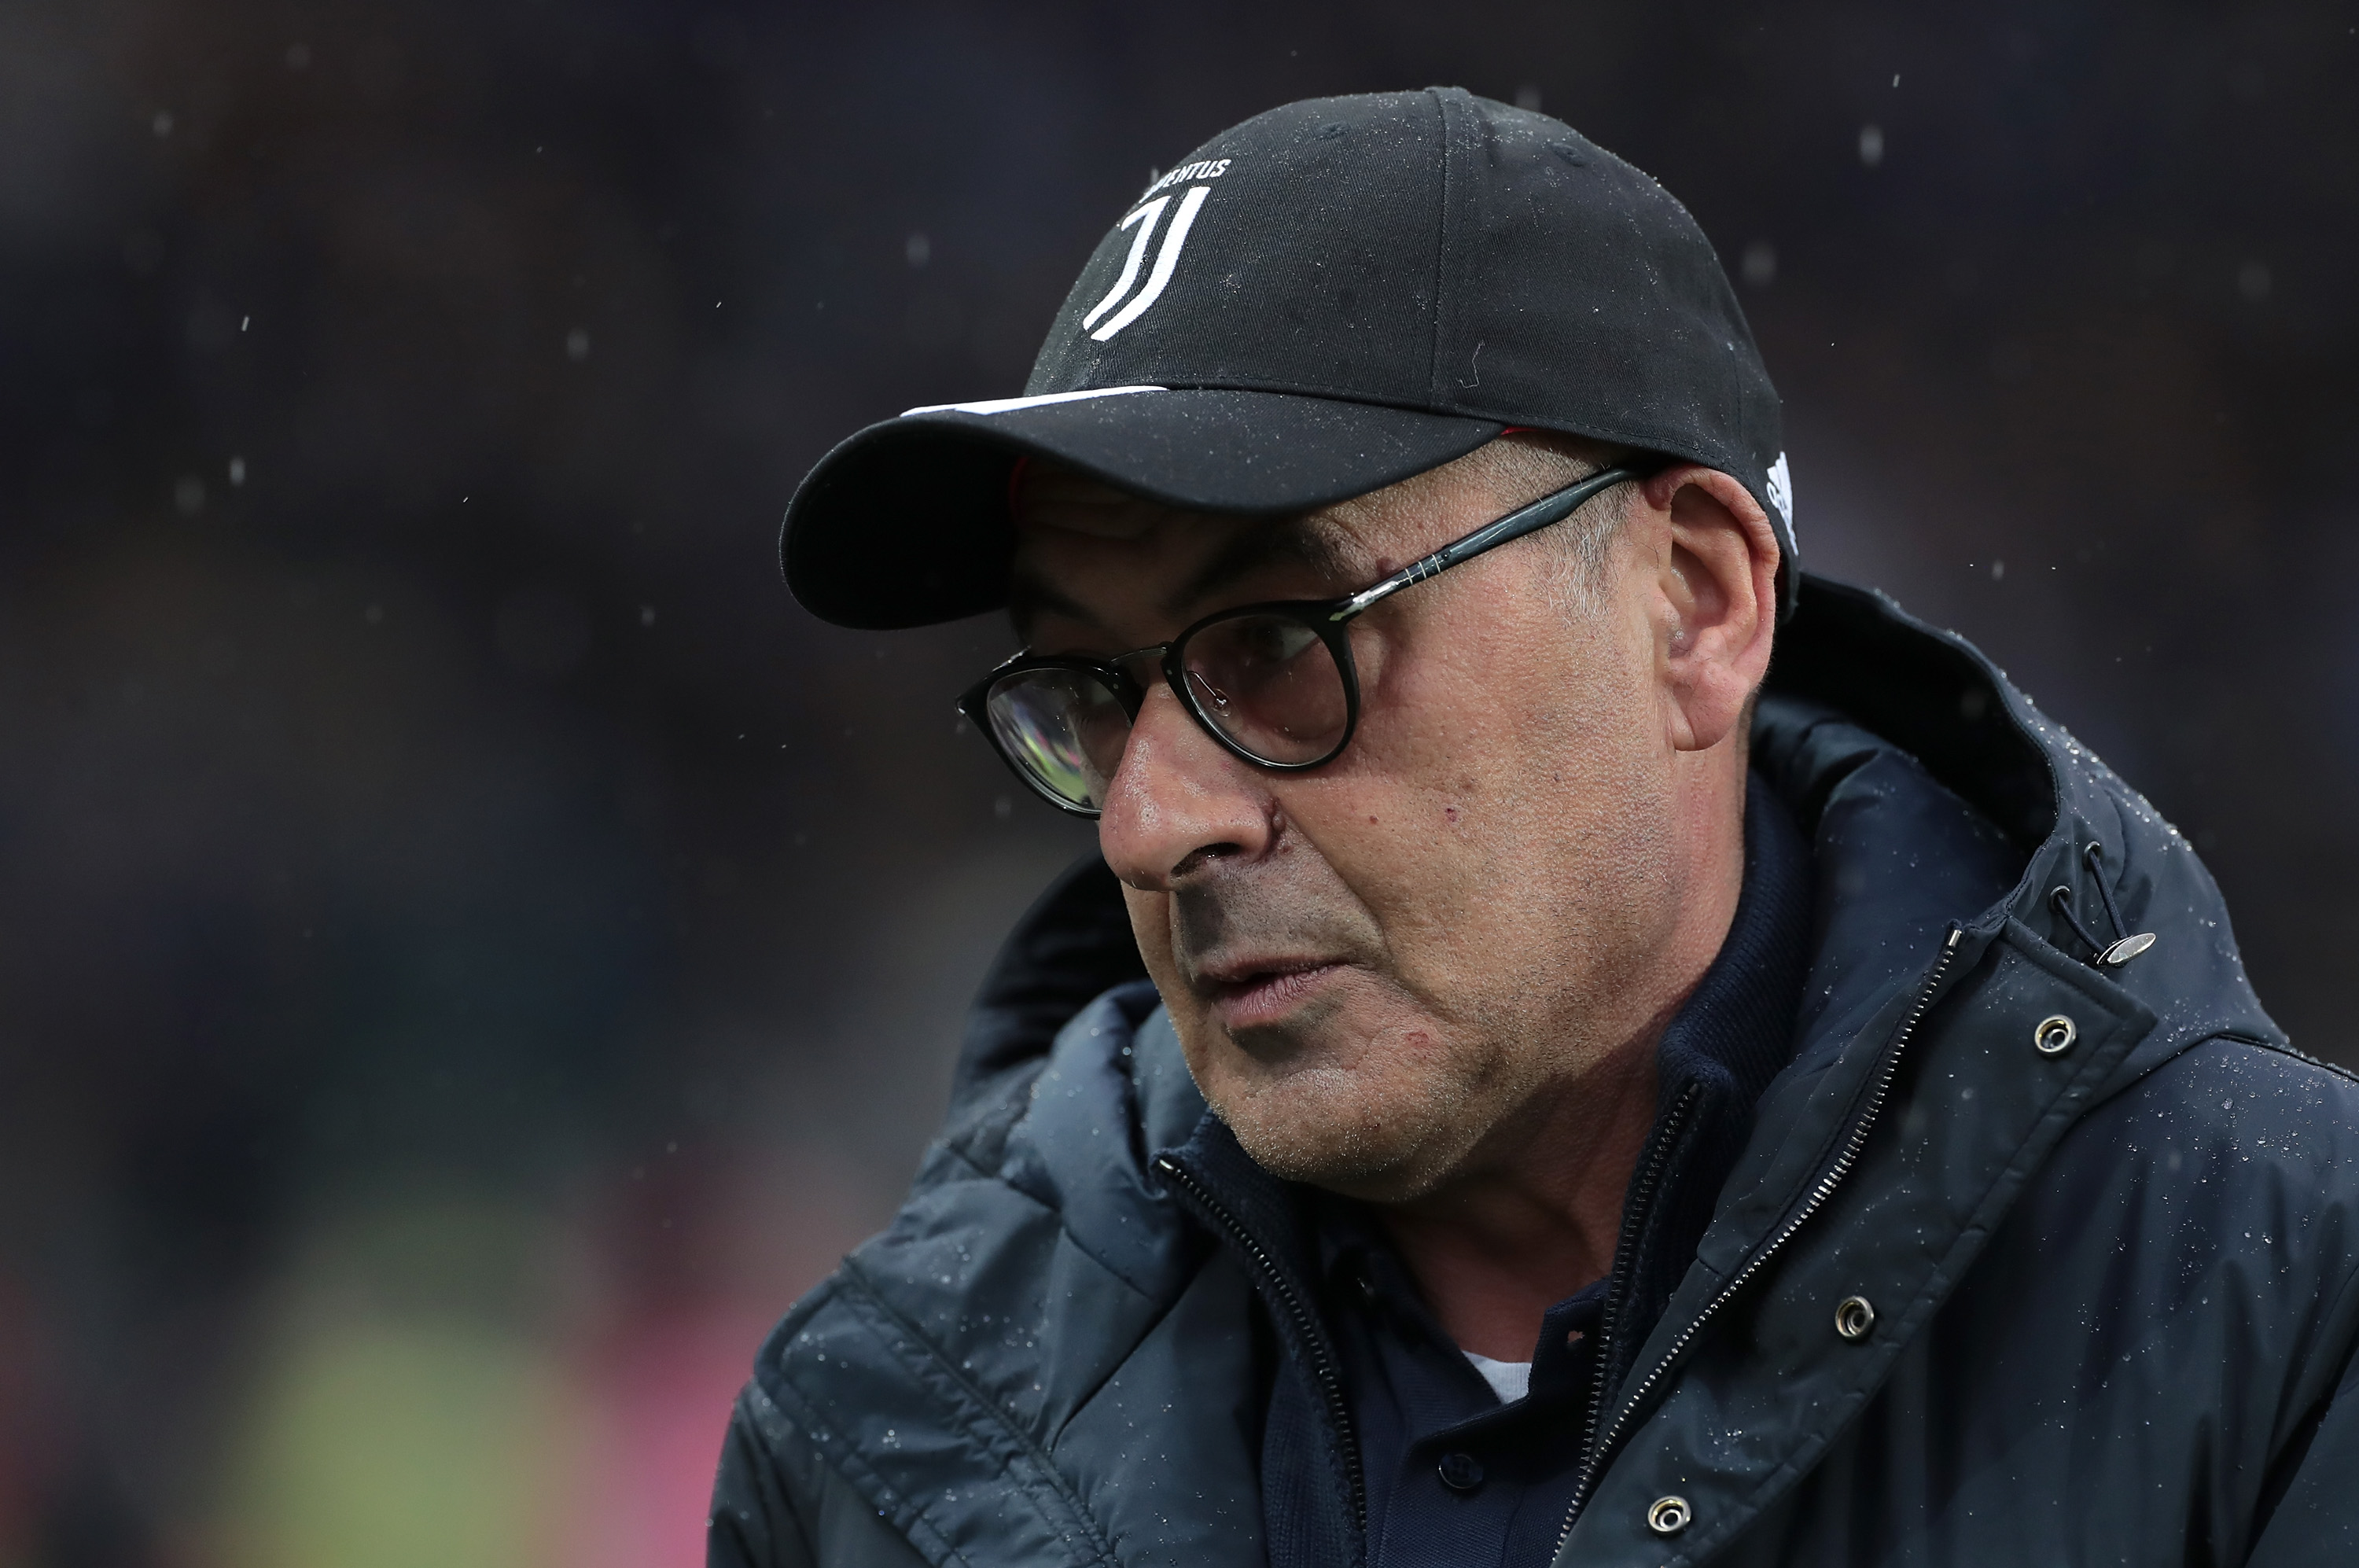 BERGAMO, ITALY - NOVEMBER 23: Juventus coach Maurizio Sarri looks on during the Serie A match between Atalanta BC and Juventus at Gewiss Stadium on November 23, 2019 in Bergamo, Italy. (Photo by Emilio Andreoli/Getty Images)